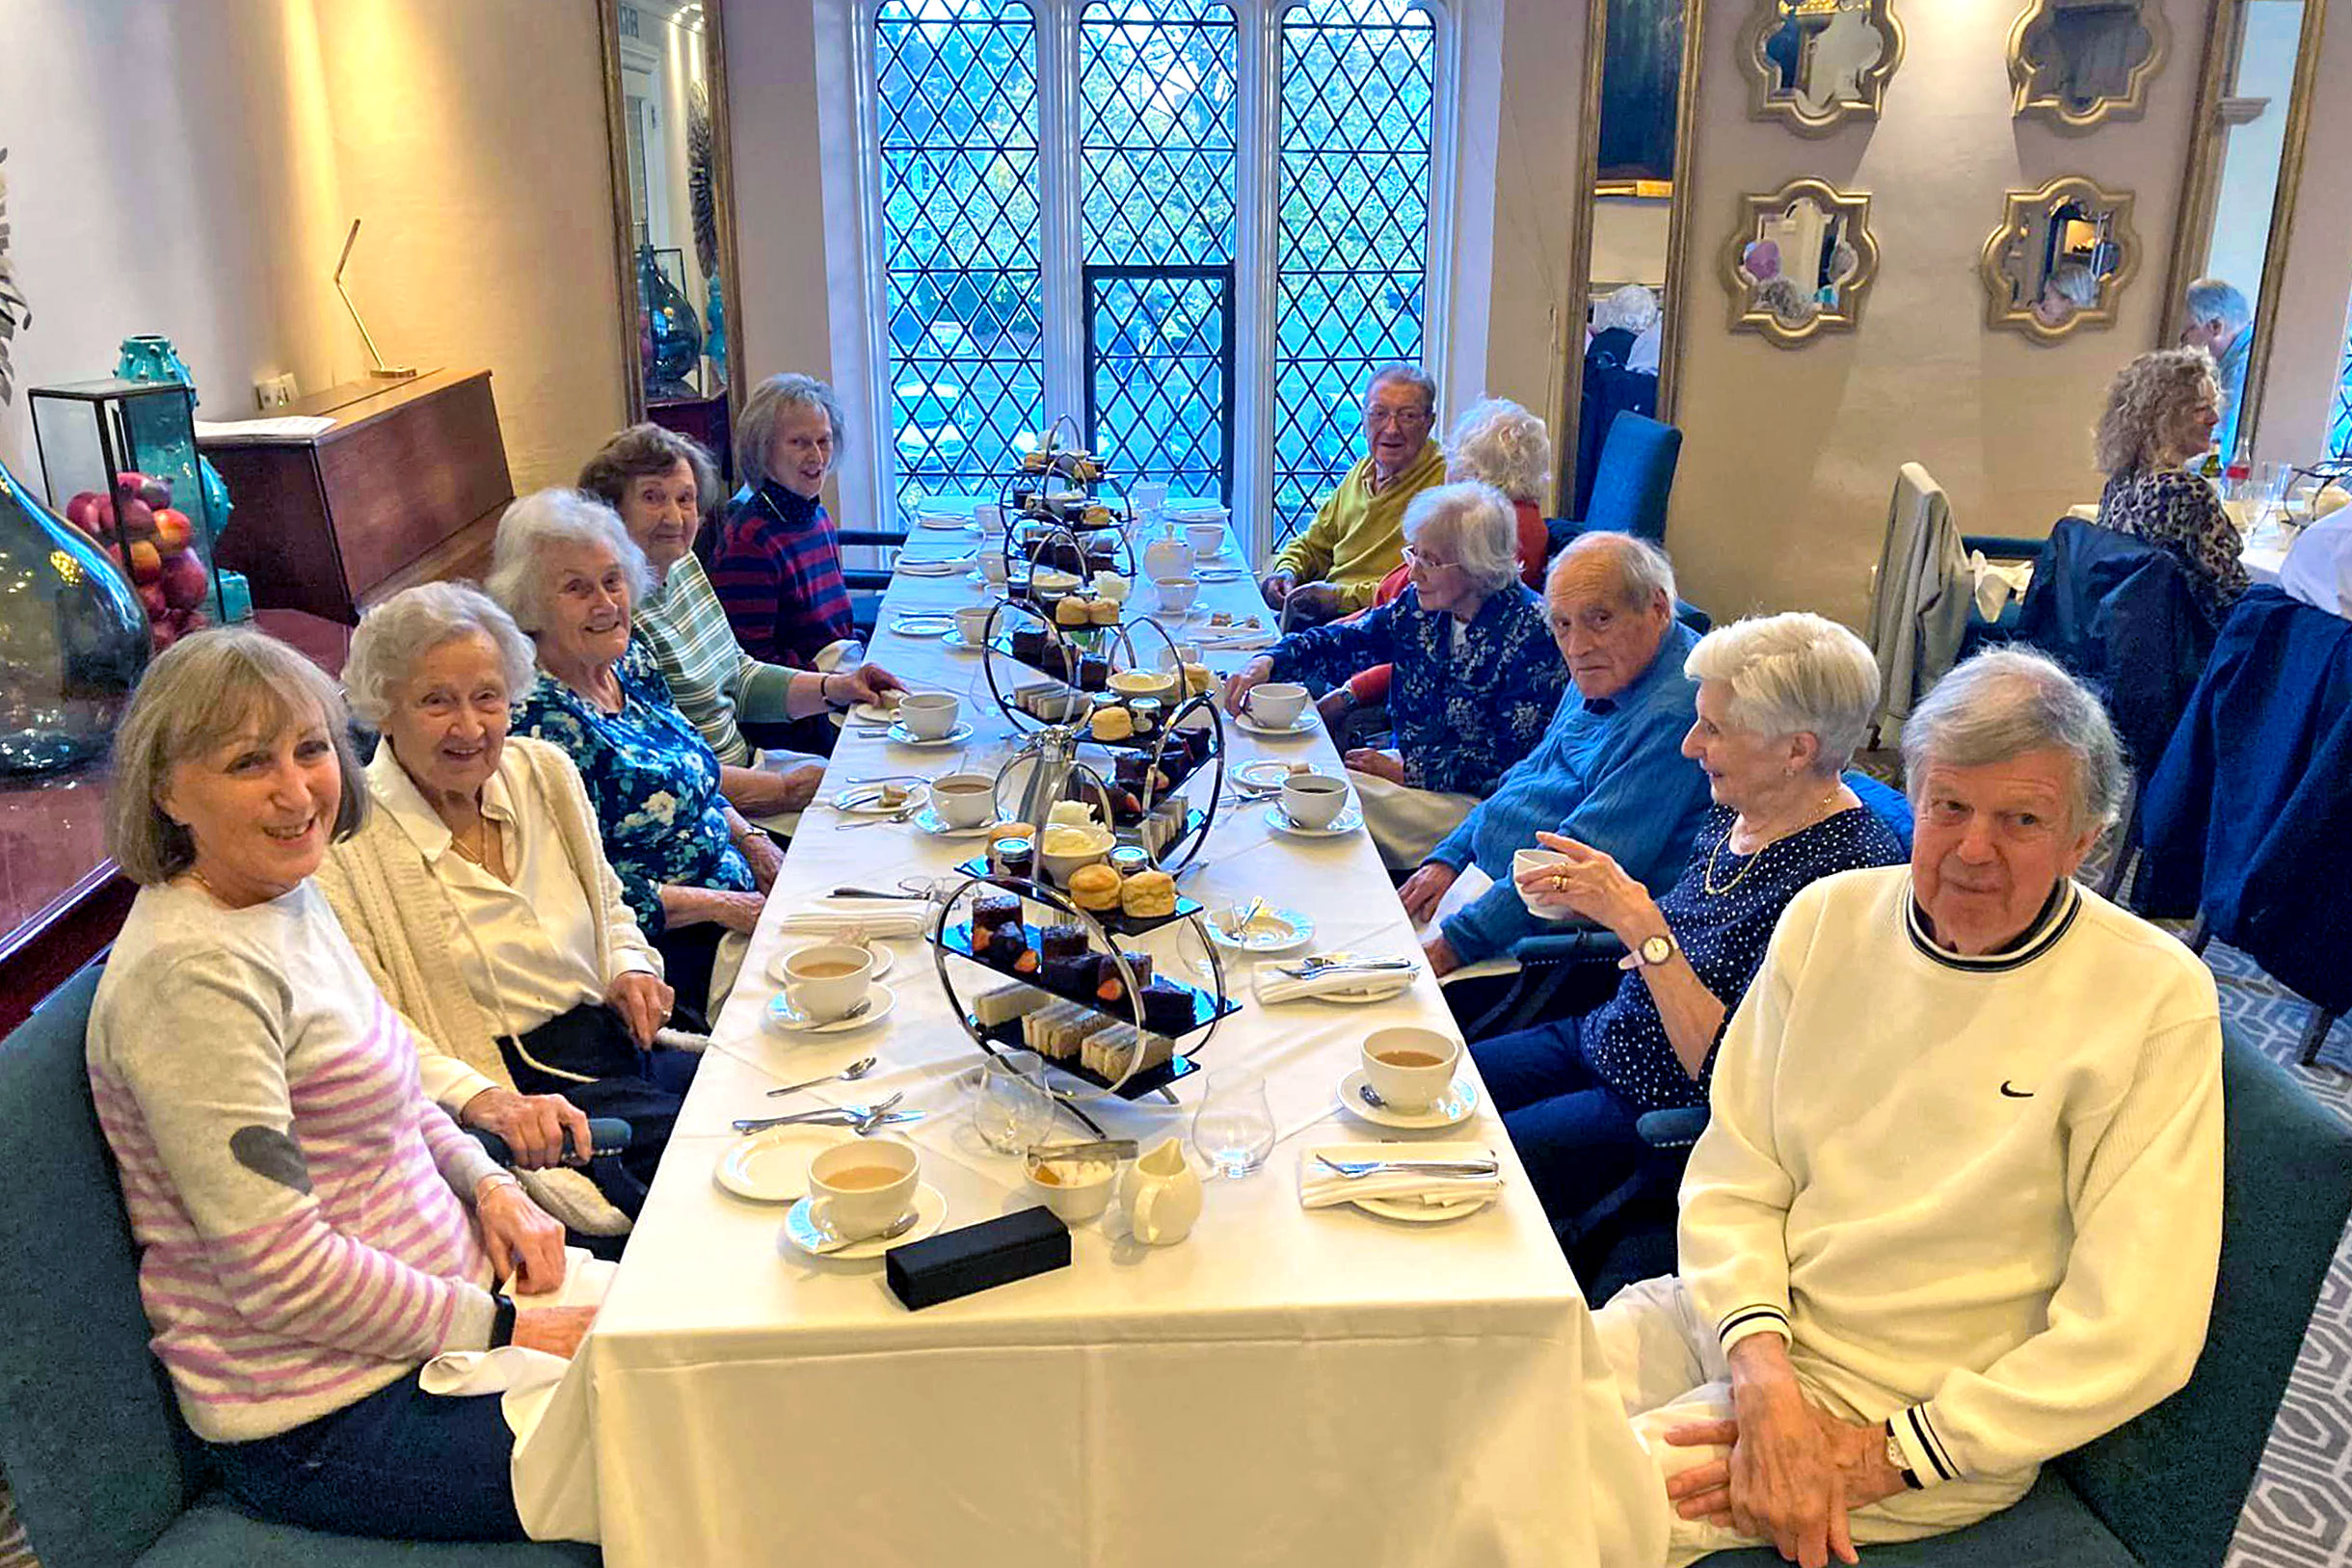 People take afternoon tea at a long table